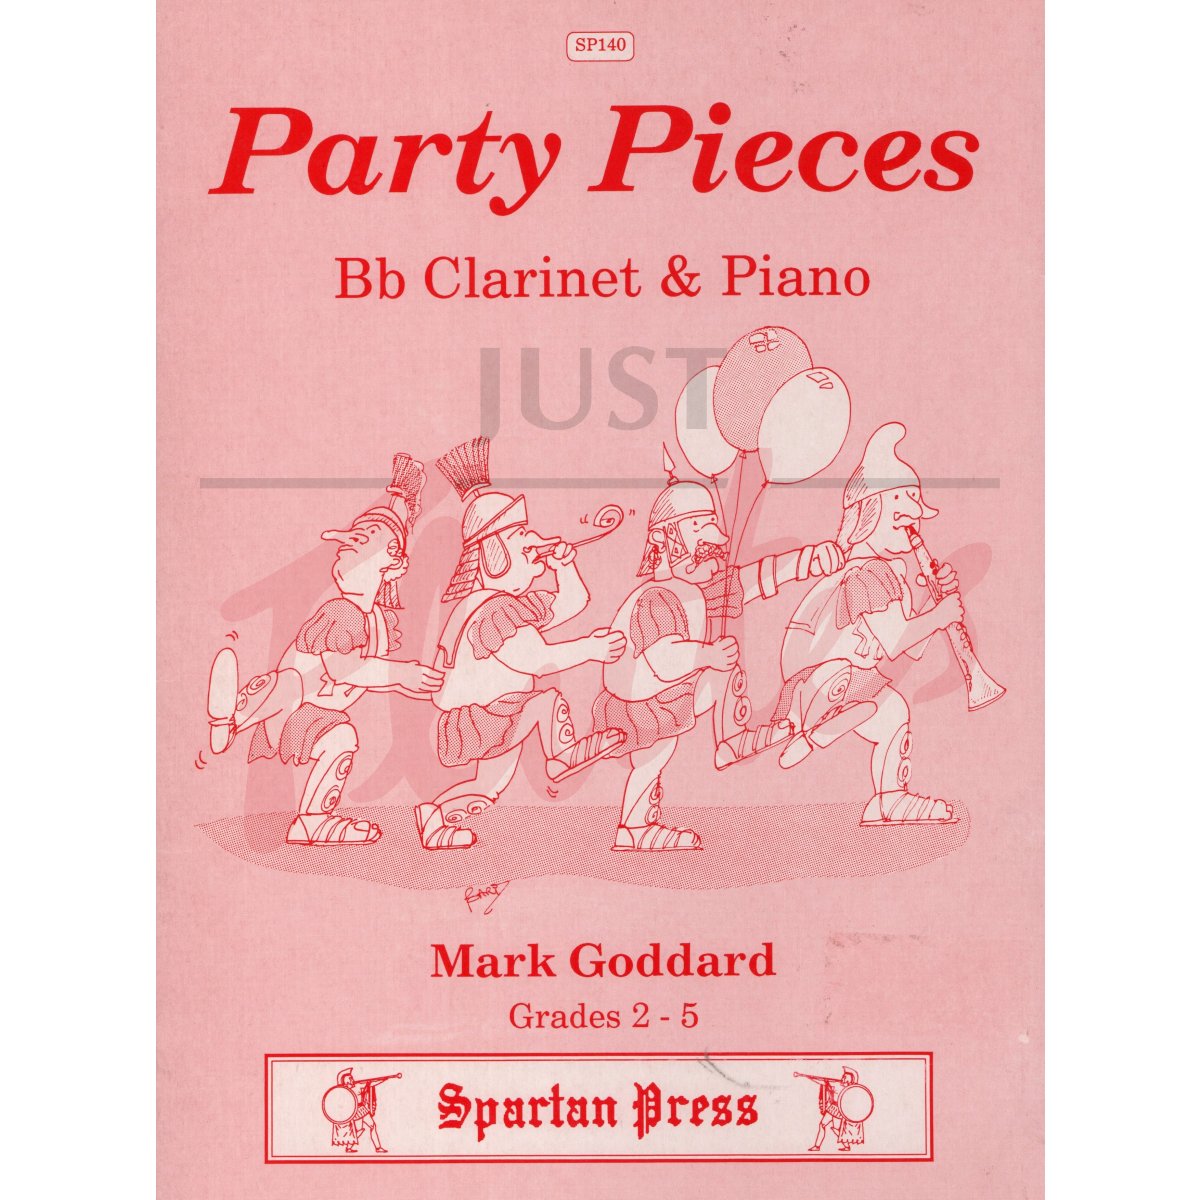 Party Pieces for Clarinet